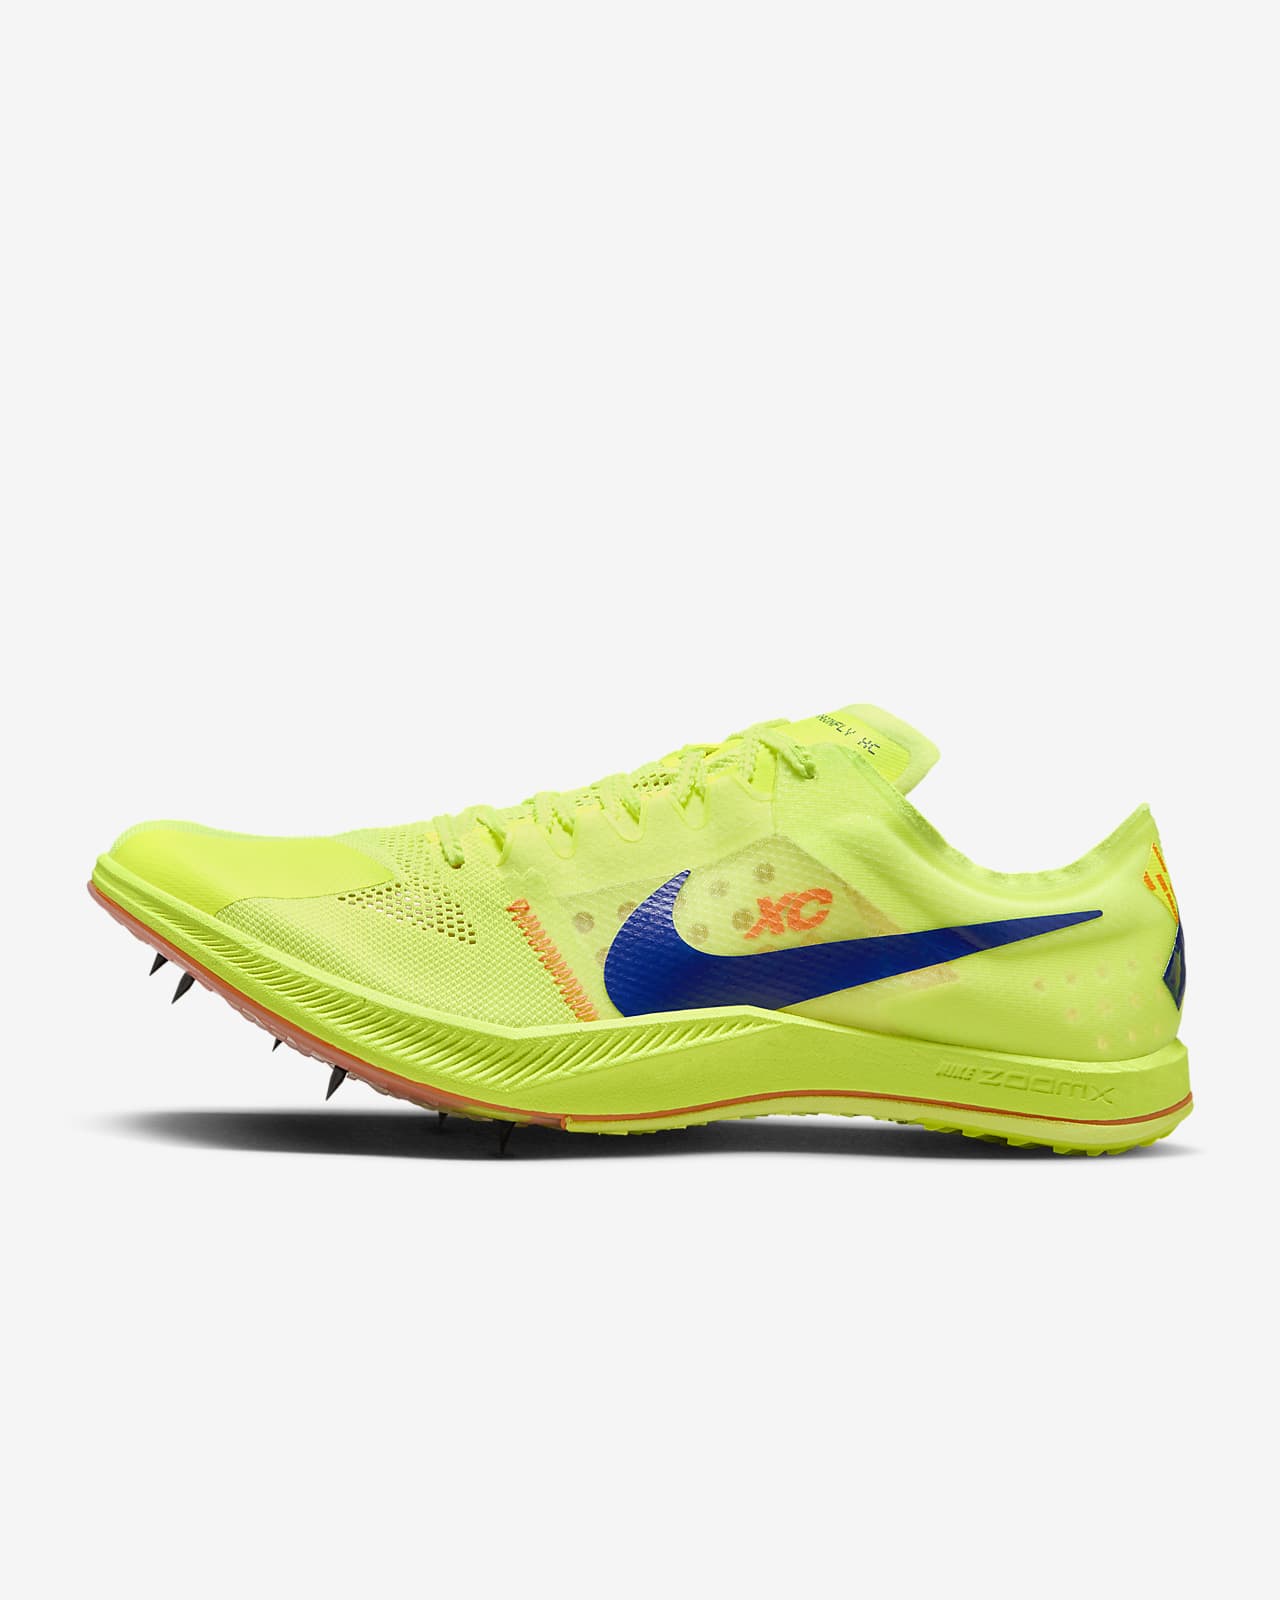 Nike ZoomX Dragonfly Athletics Distance Spikes. Nike CA